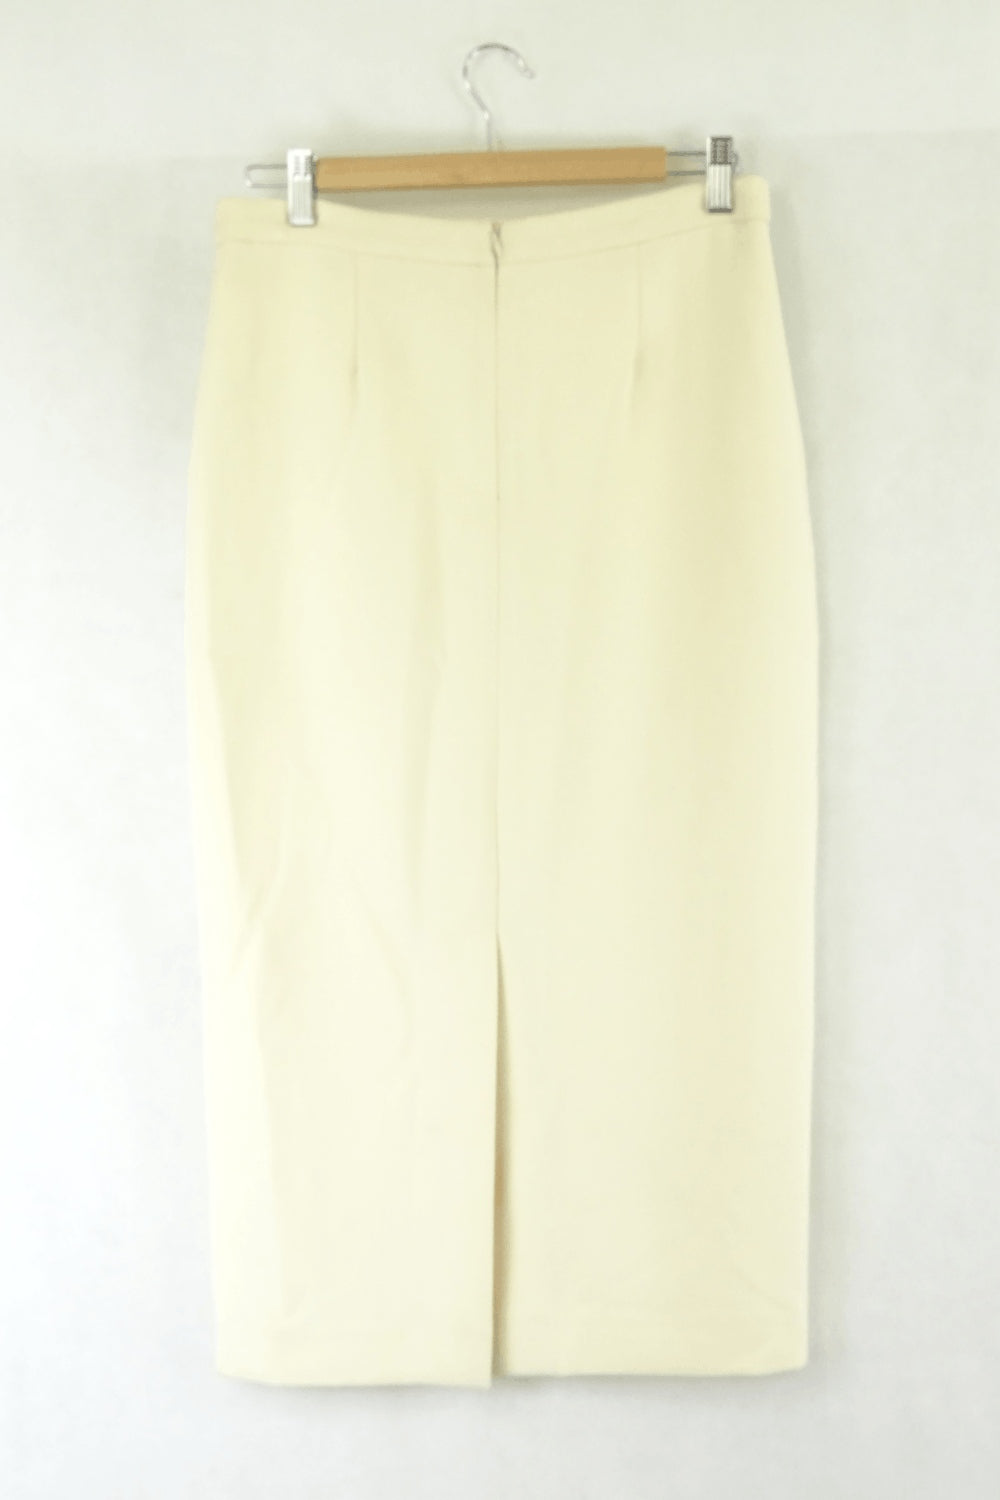 By Timo Yellow Skirt M